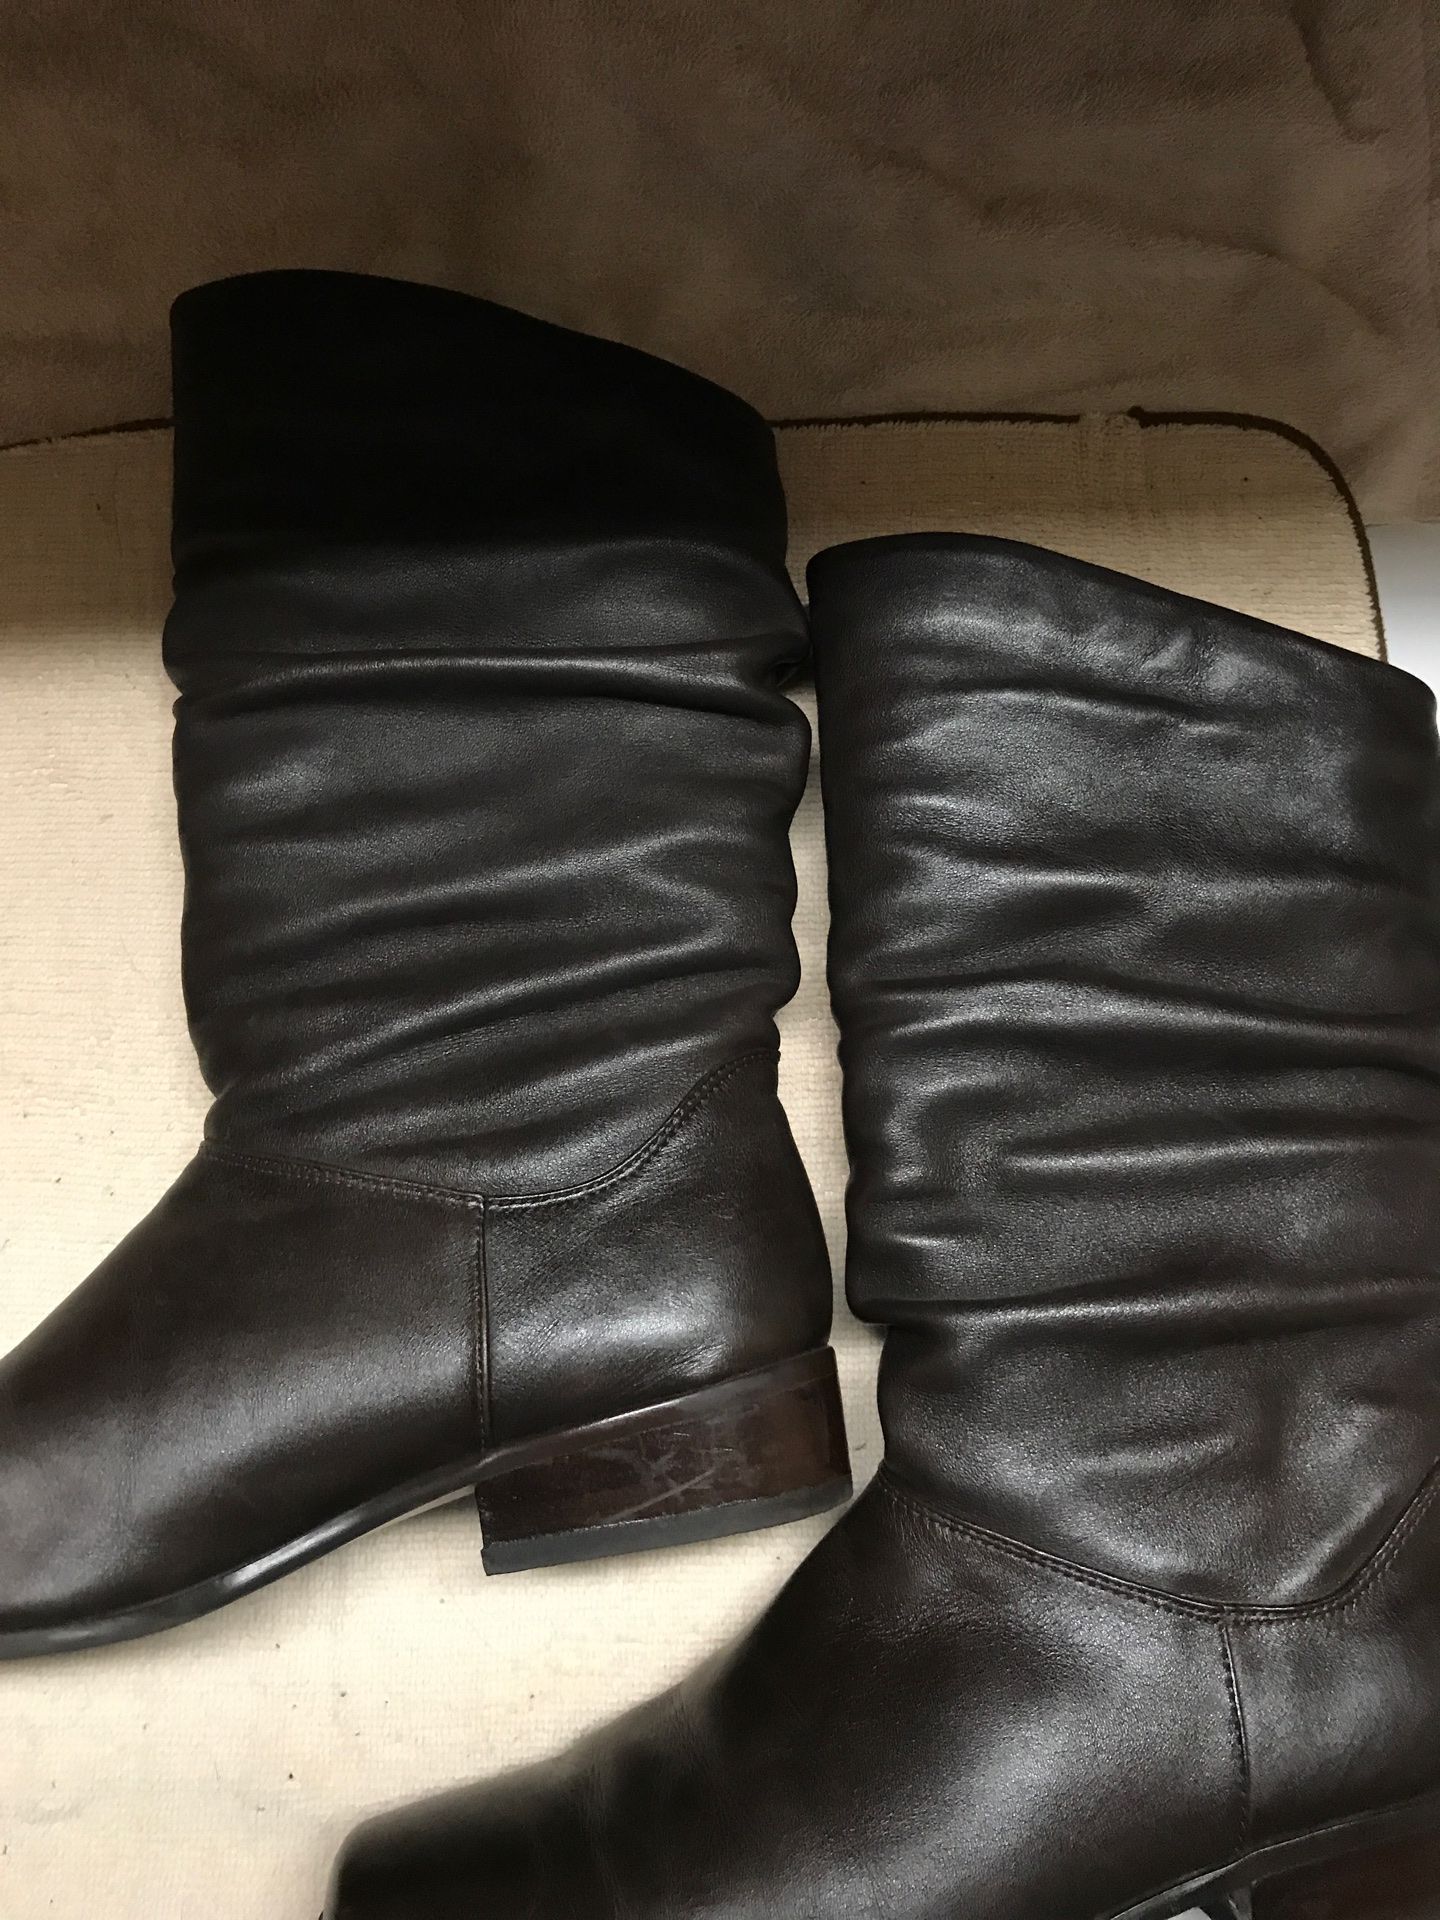 Ladies brown boots. Size 8 1/2